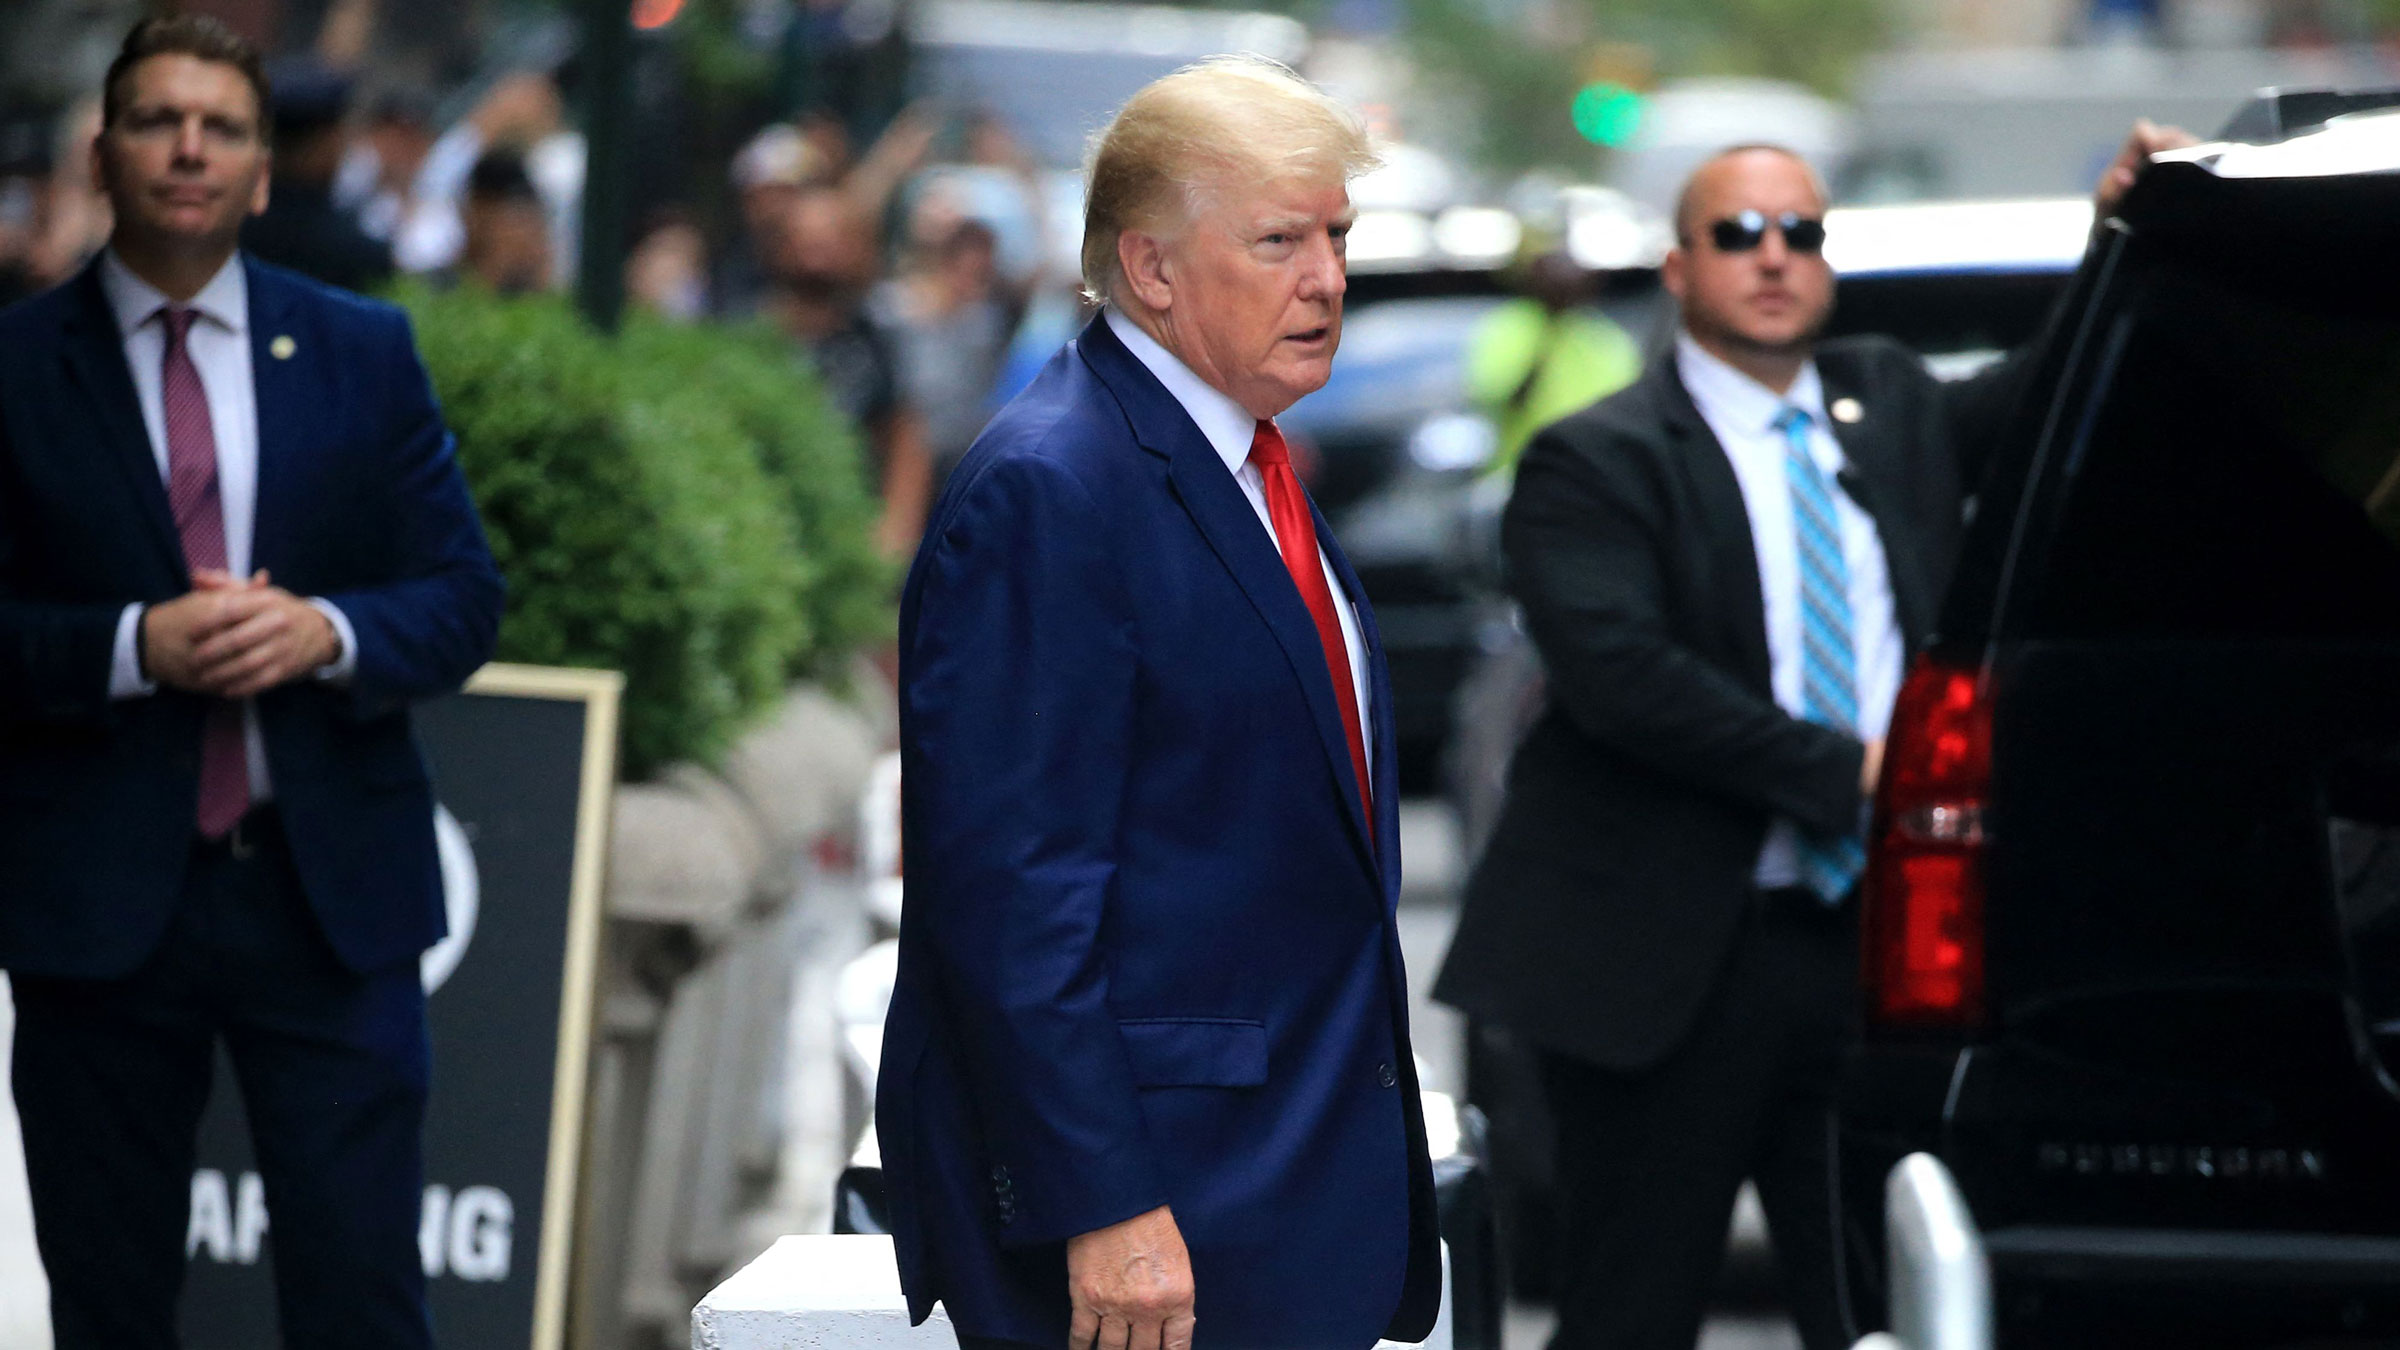 Former President Donald Trump walks to a vehicle outside of Trump Tower in New York in August.